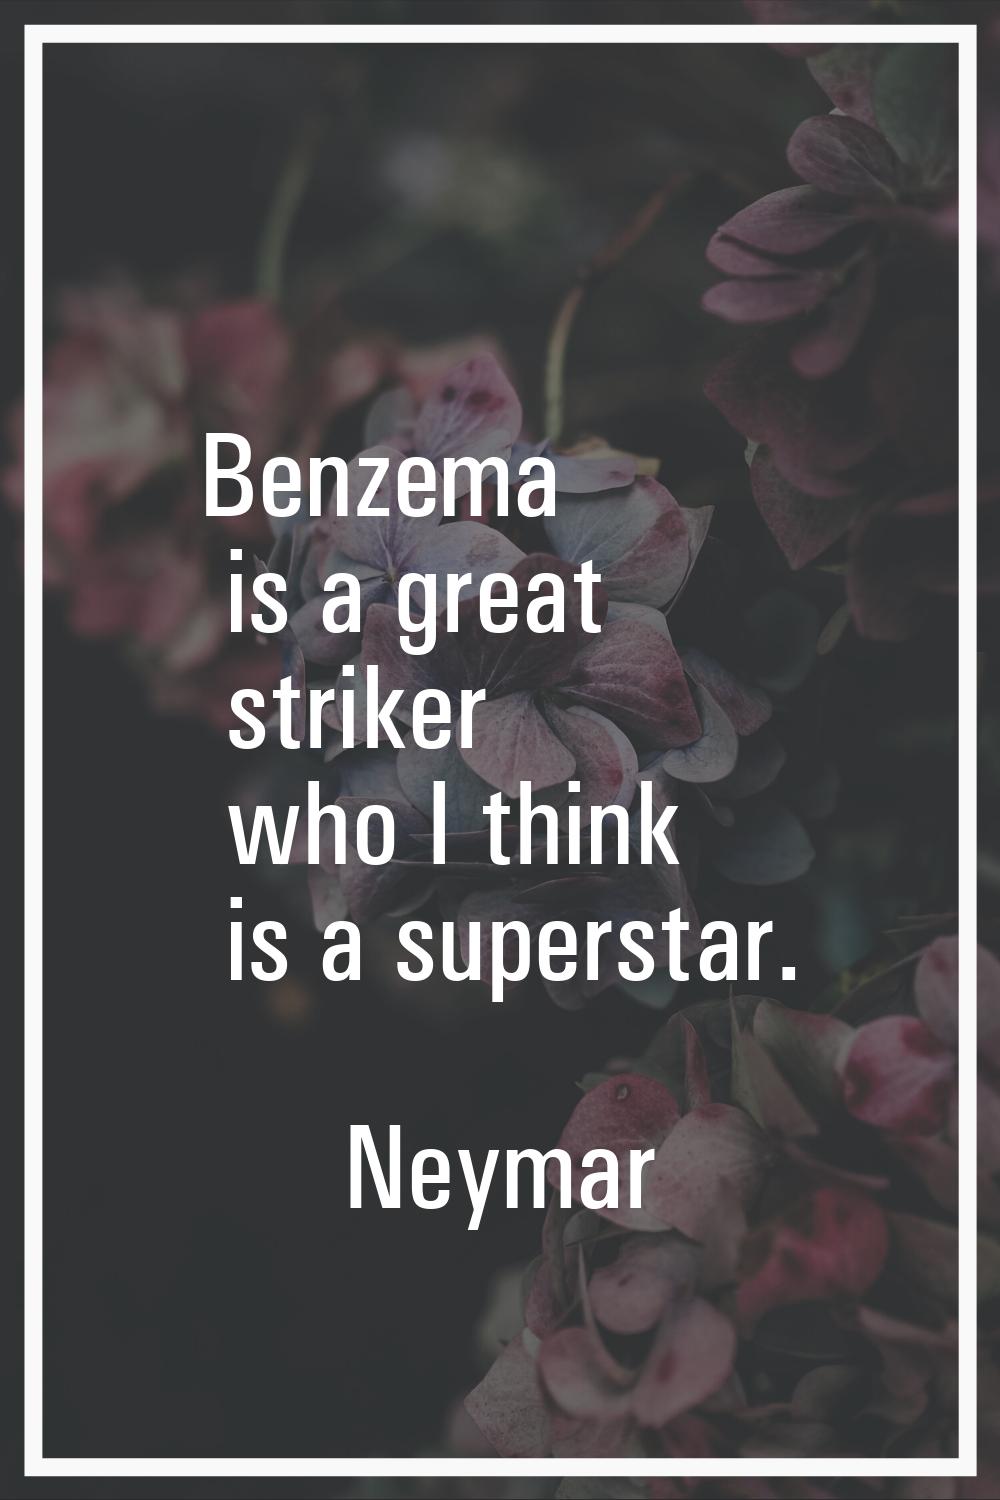 Benzema is a great striker who I think is a superstar.